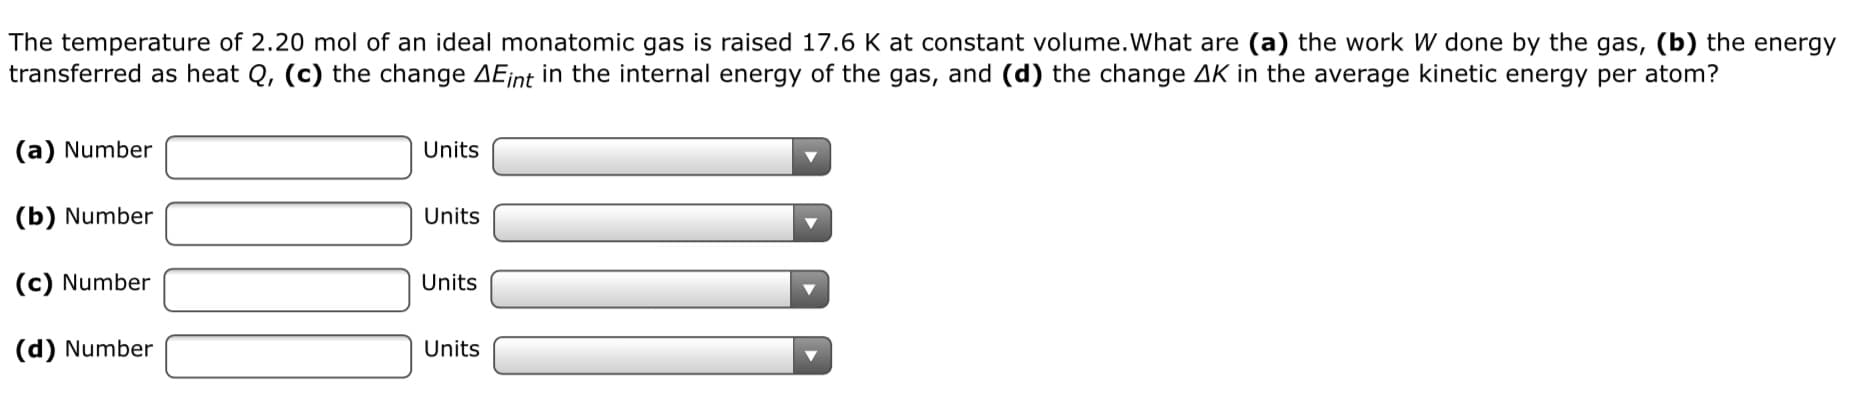 The temperature of 2.20 mol of an ideal monatomic gas is raised 17.6 K at constant volume.What are (a) the work W done by the gas, (b) the energy
transferred as heat Q, (c) the change AEint in the internal energy of the gas, and (d) the change AK in the average kinetic energy per atom?
(a) Number
Units
(b) Number
Units
(c) Number
Units
(d) Number
Units
